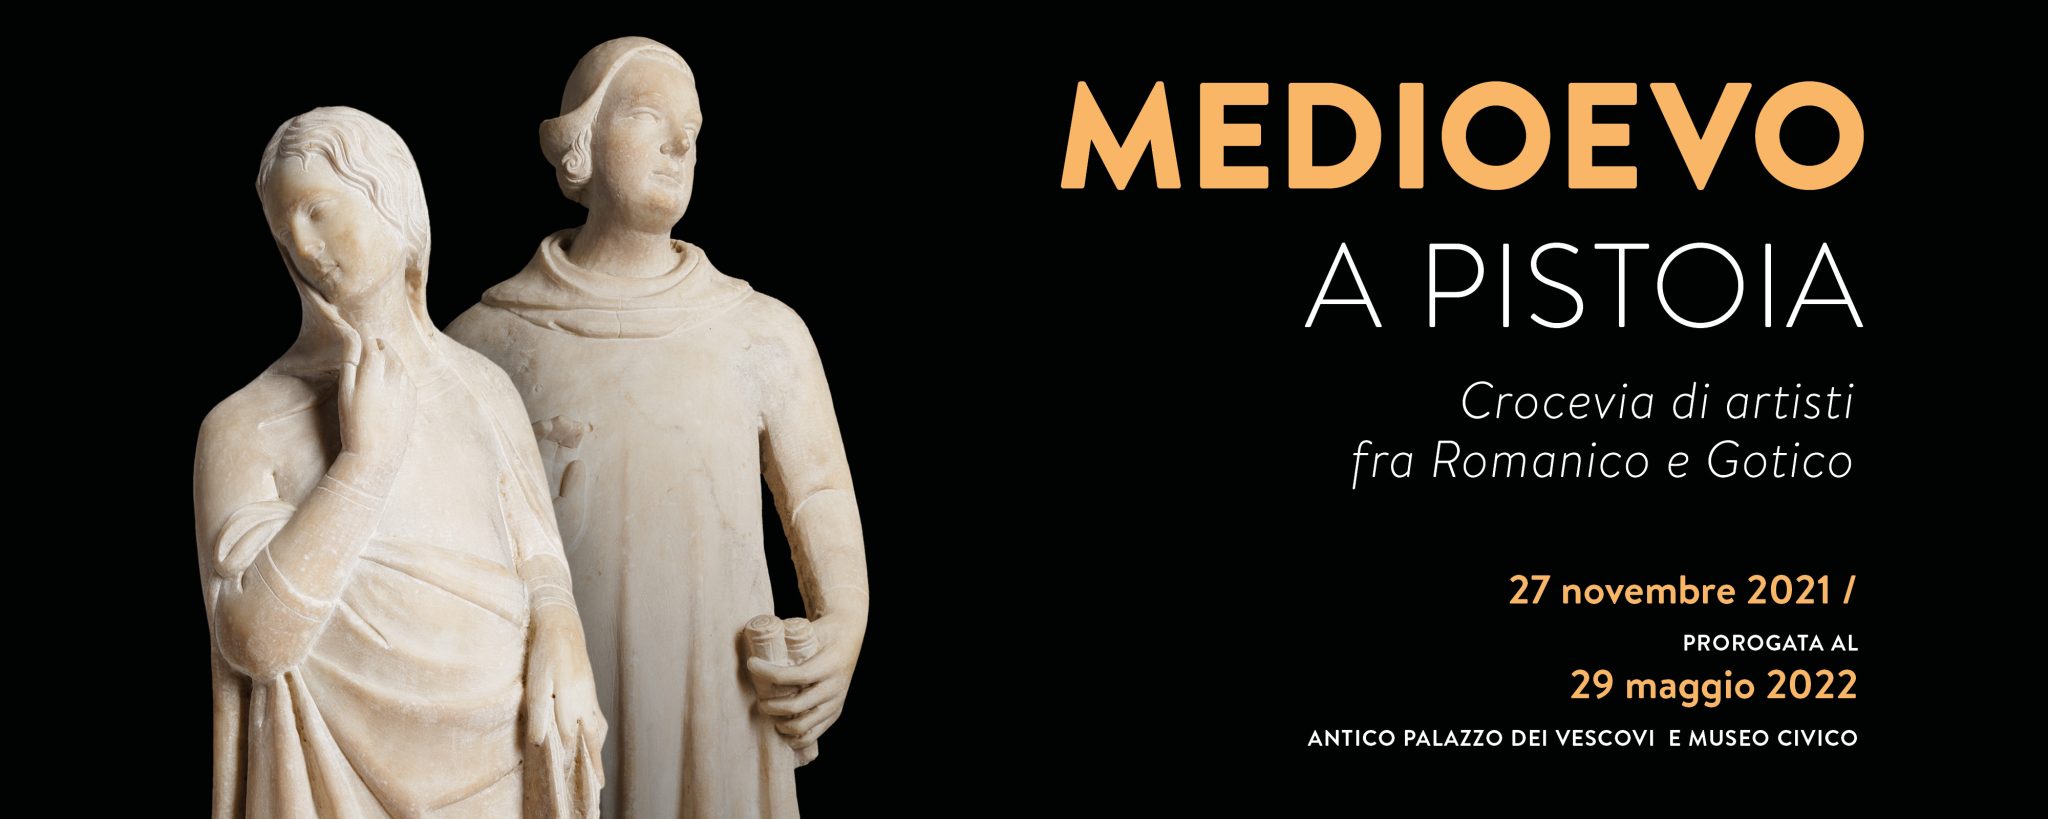 Middle Ages in Pistoia, for the first time a major exhibition on medieval  art in the Pistoia area